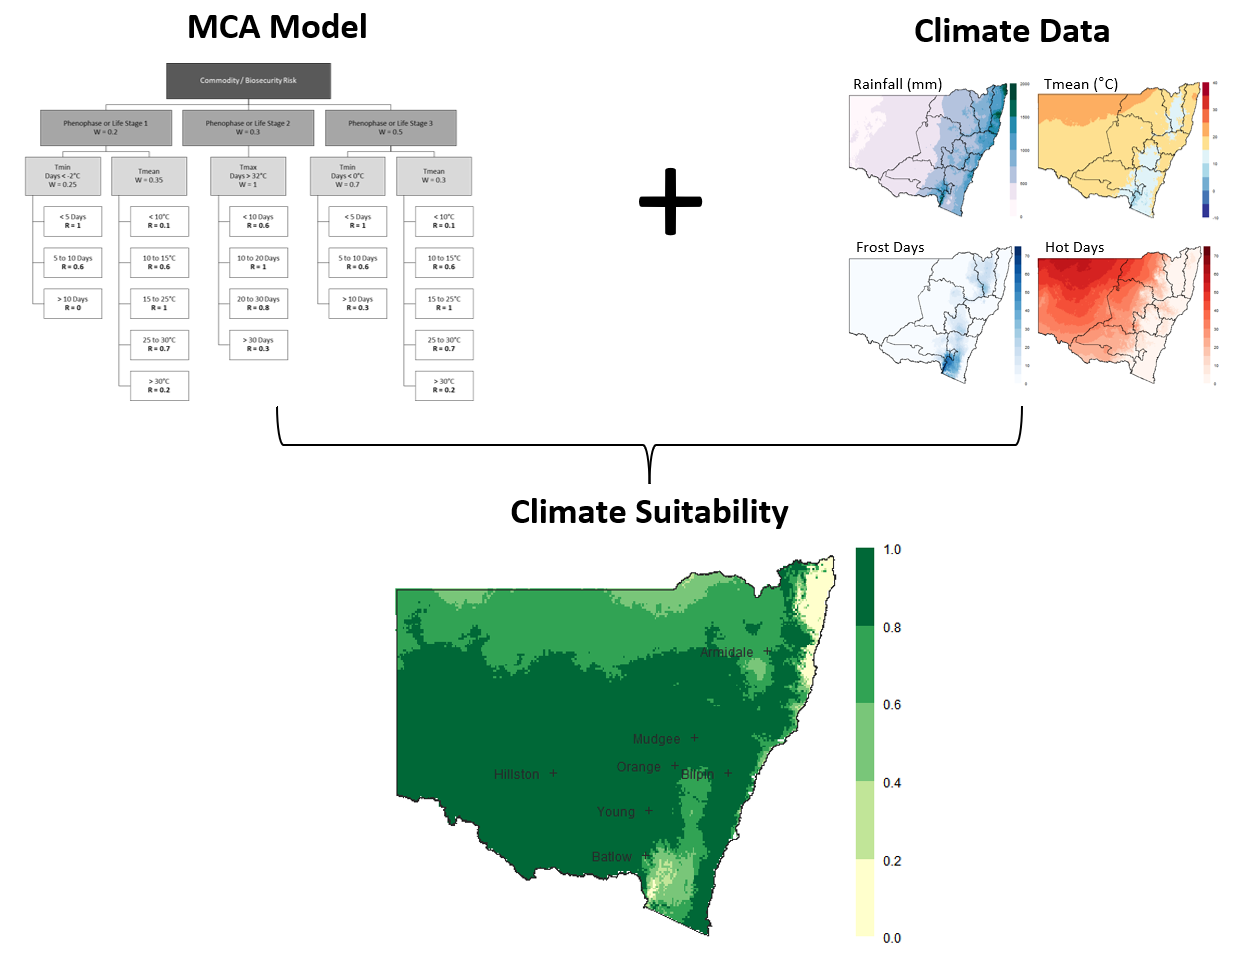 The Climate Vulnerability Assessment Project calculated climate suitability across NSW using MCA models and historical and future projected climate data.